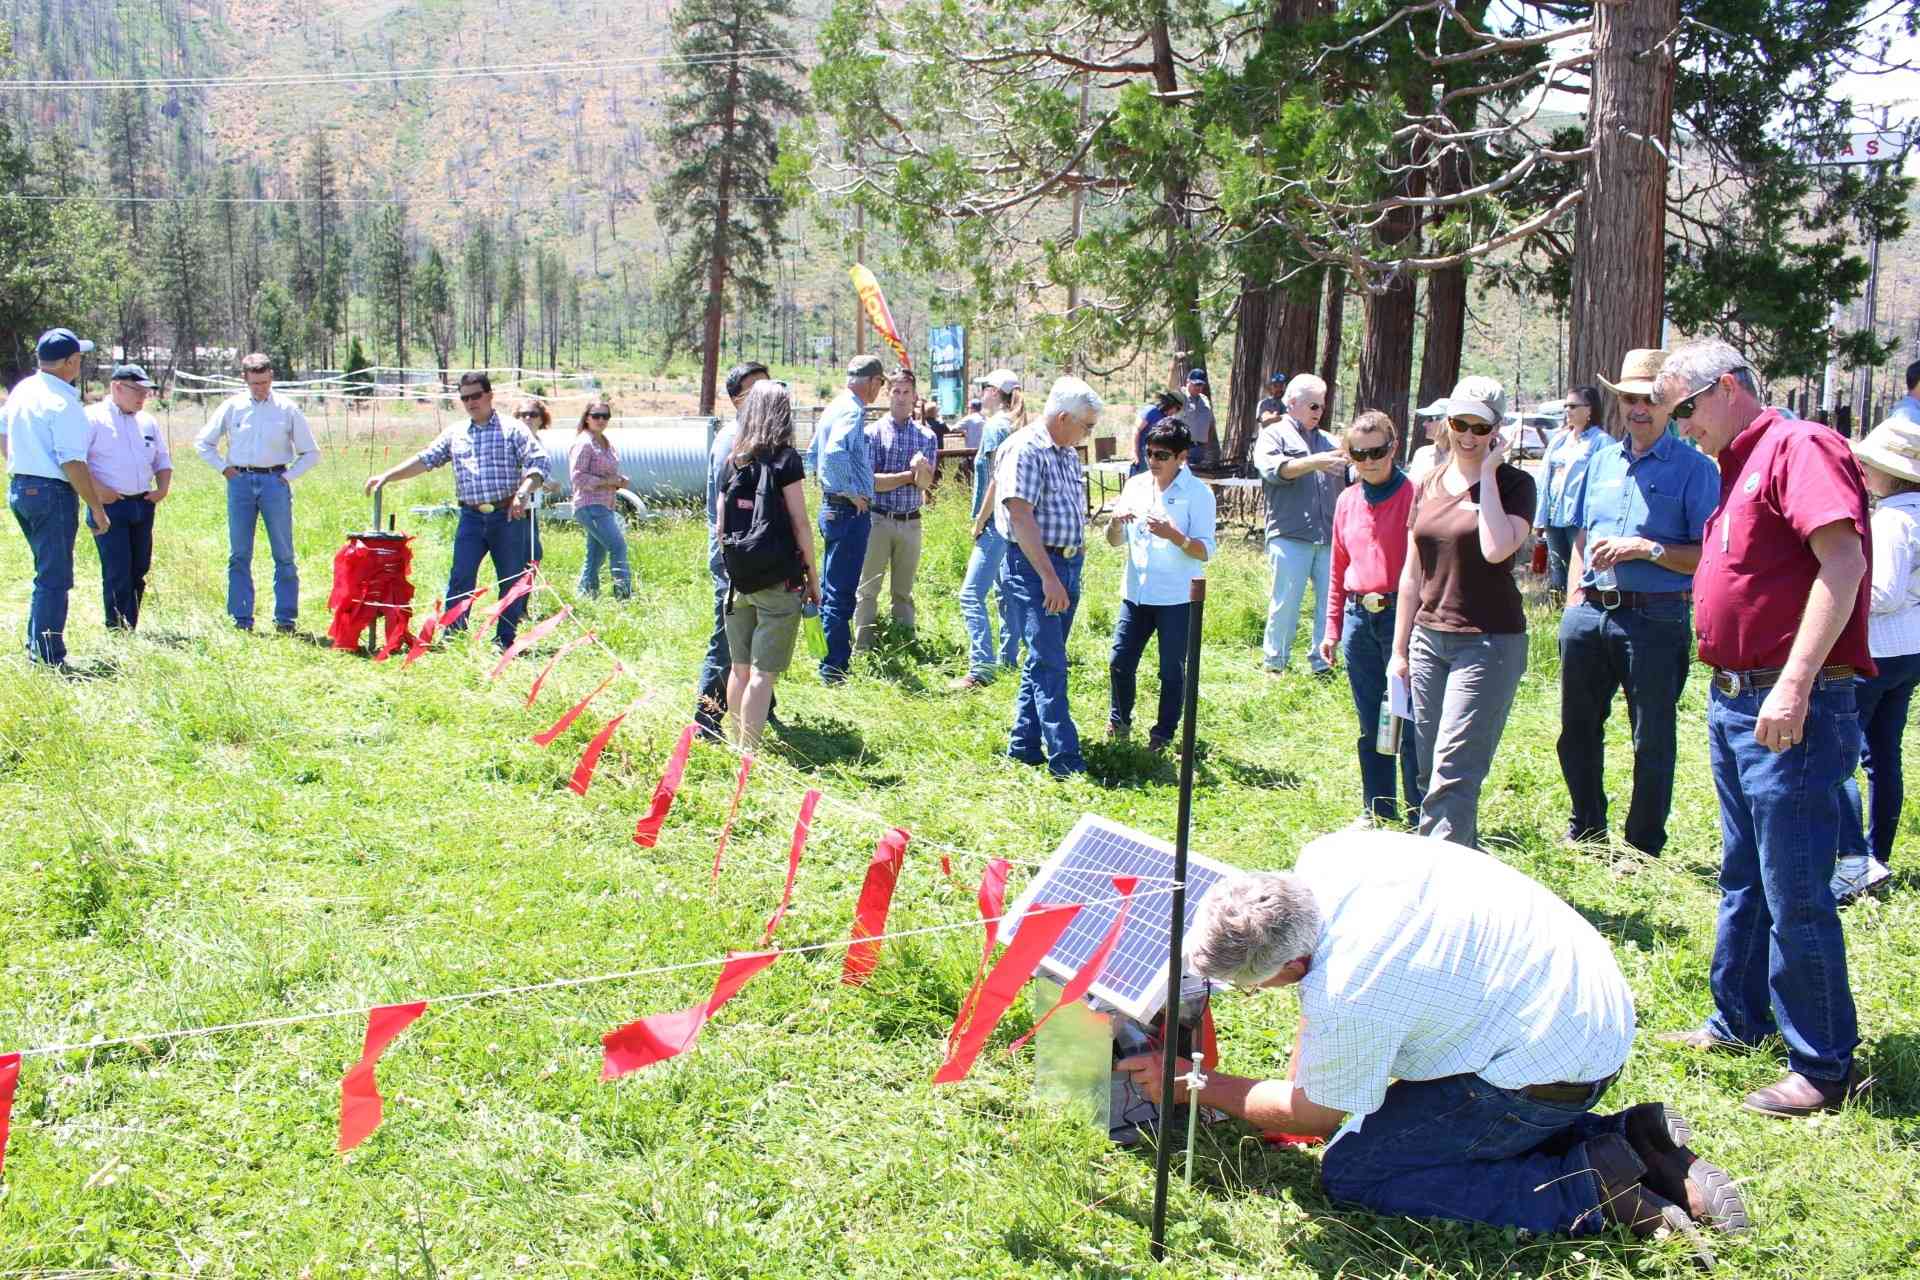 Nearly 80 participants attended the Wolf Workshop and Demonstration Day in Hat Creek, California, to learn more about wolf ecology and behavior, and to get an up-close look at several conflict reduction tools, including turbofladry, demonstrated here.